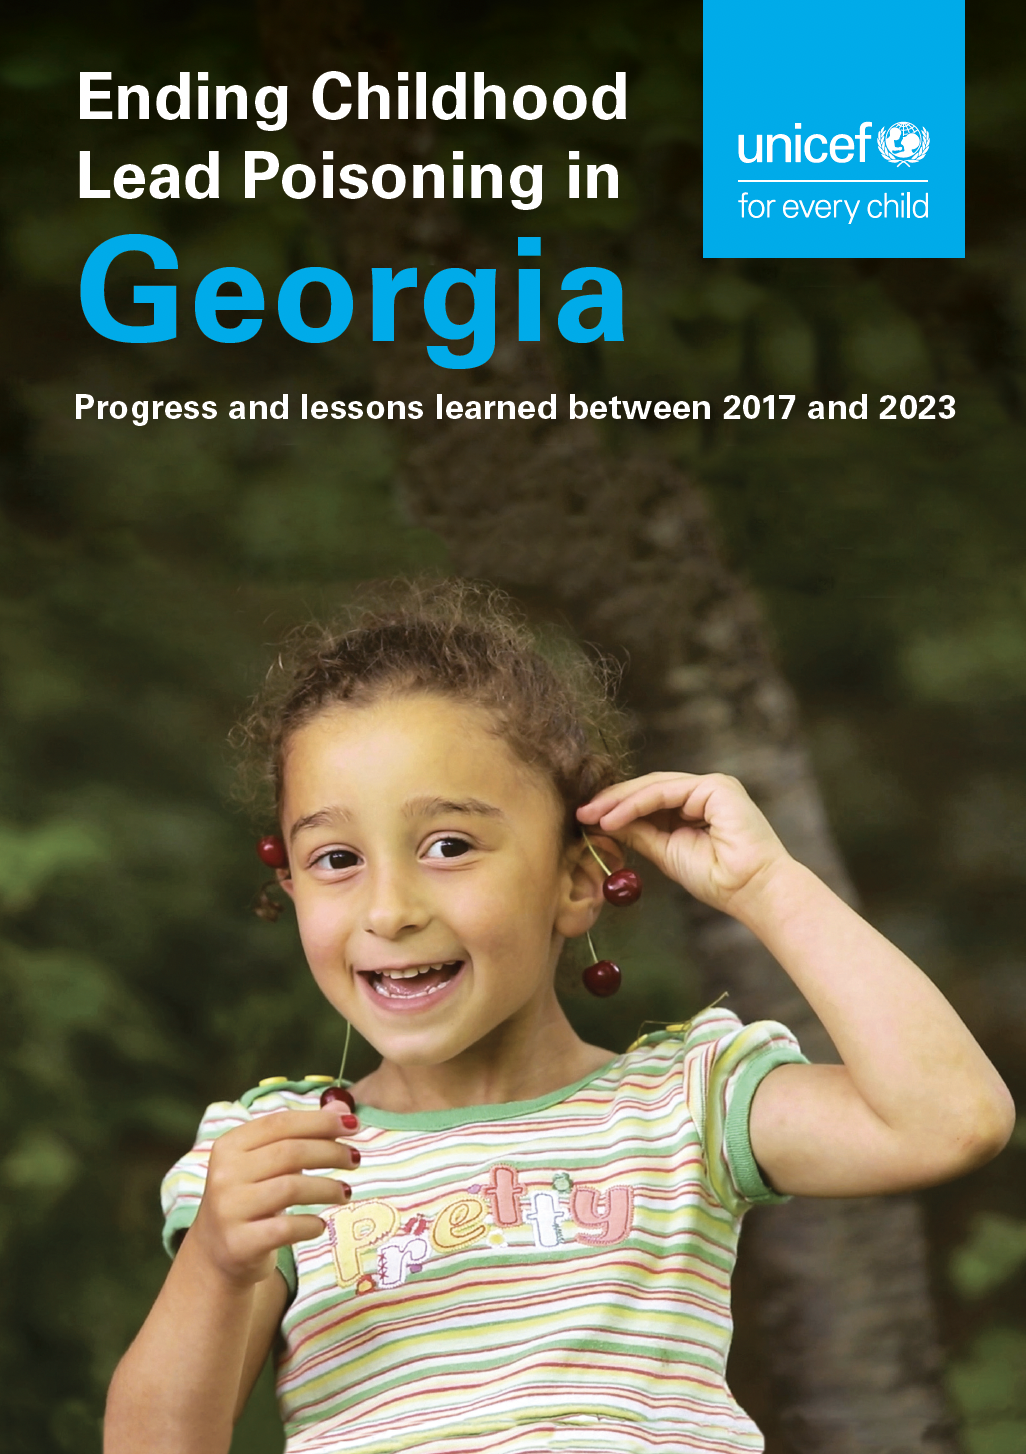 Ending Childhood Lead Poisoning in Georgia: Progress and lessons learned between 2017 and 2023